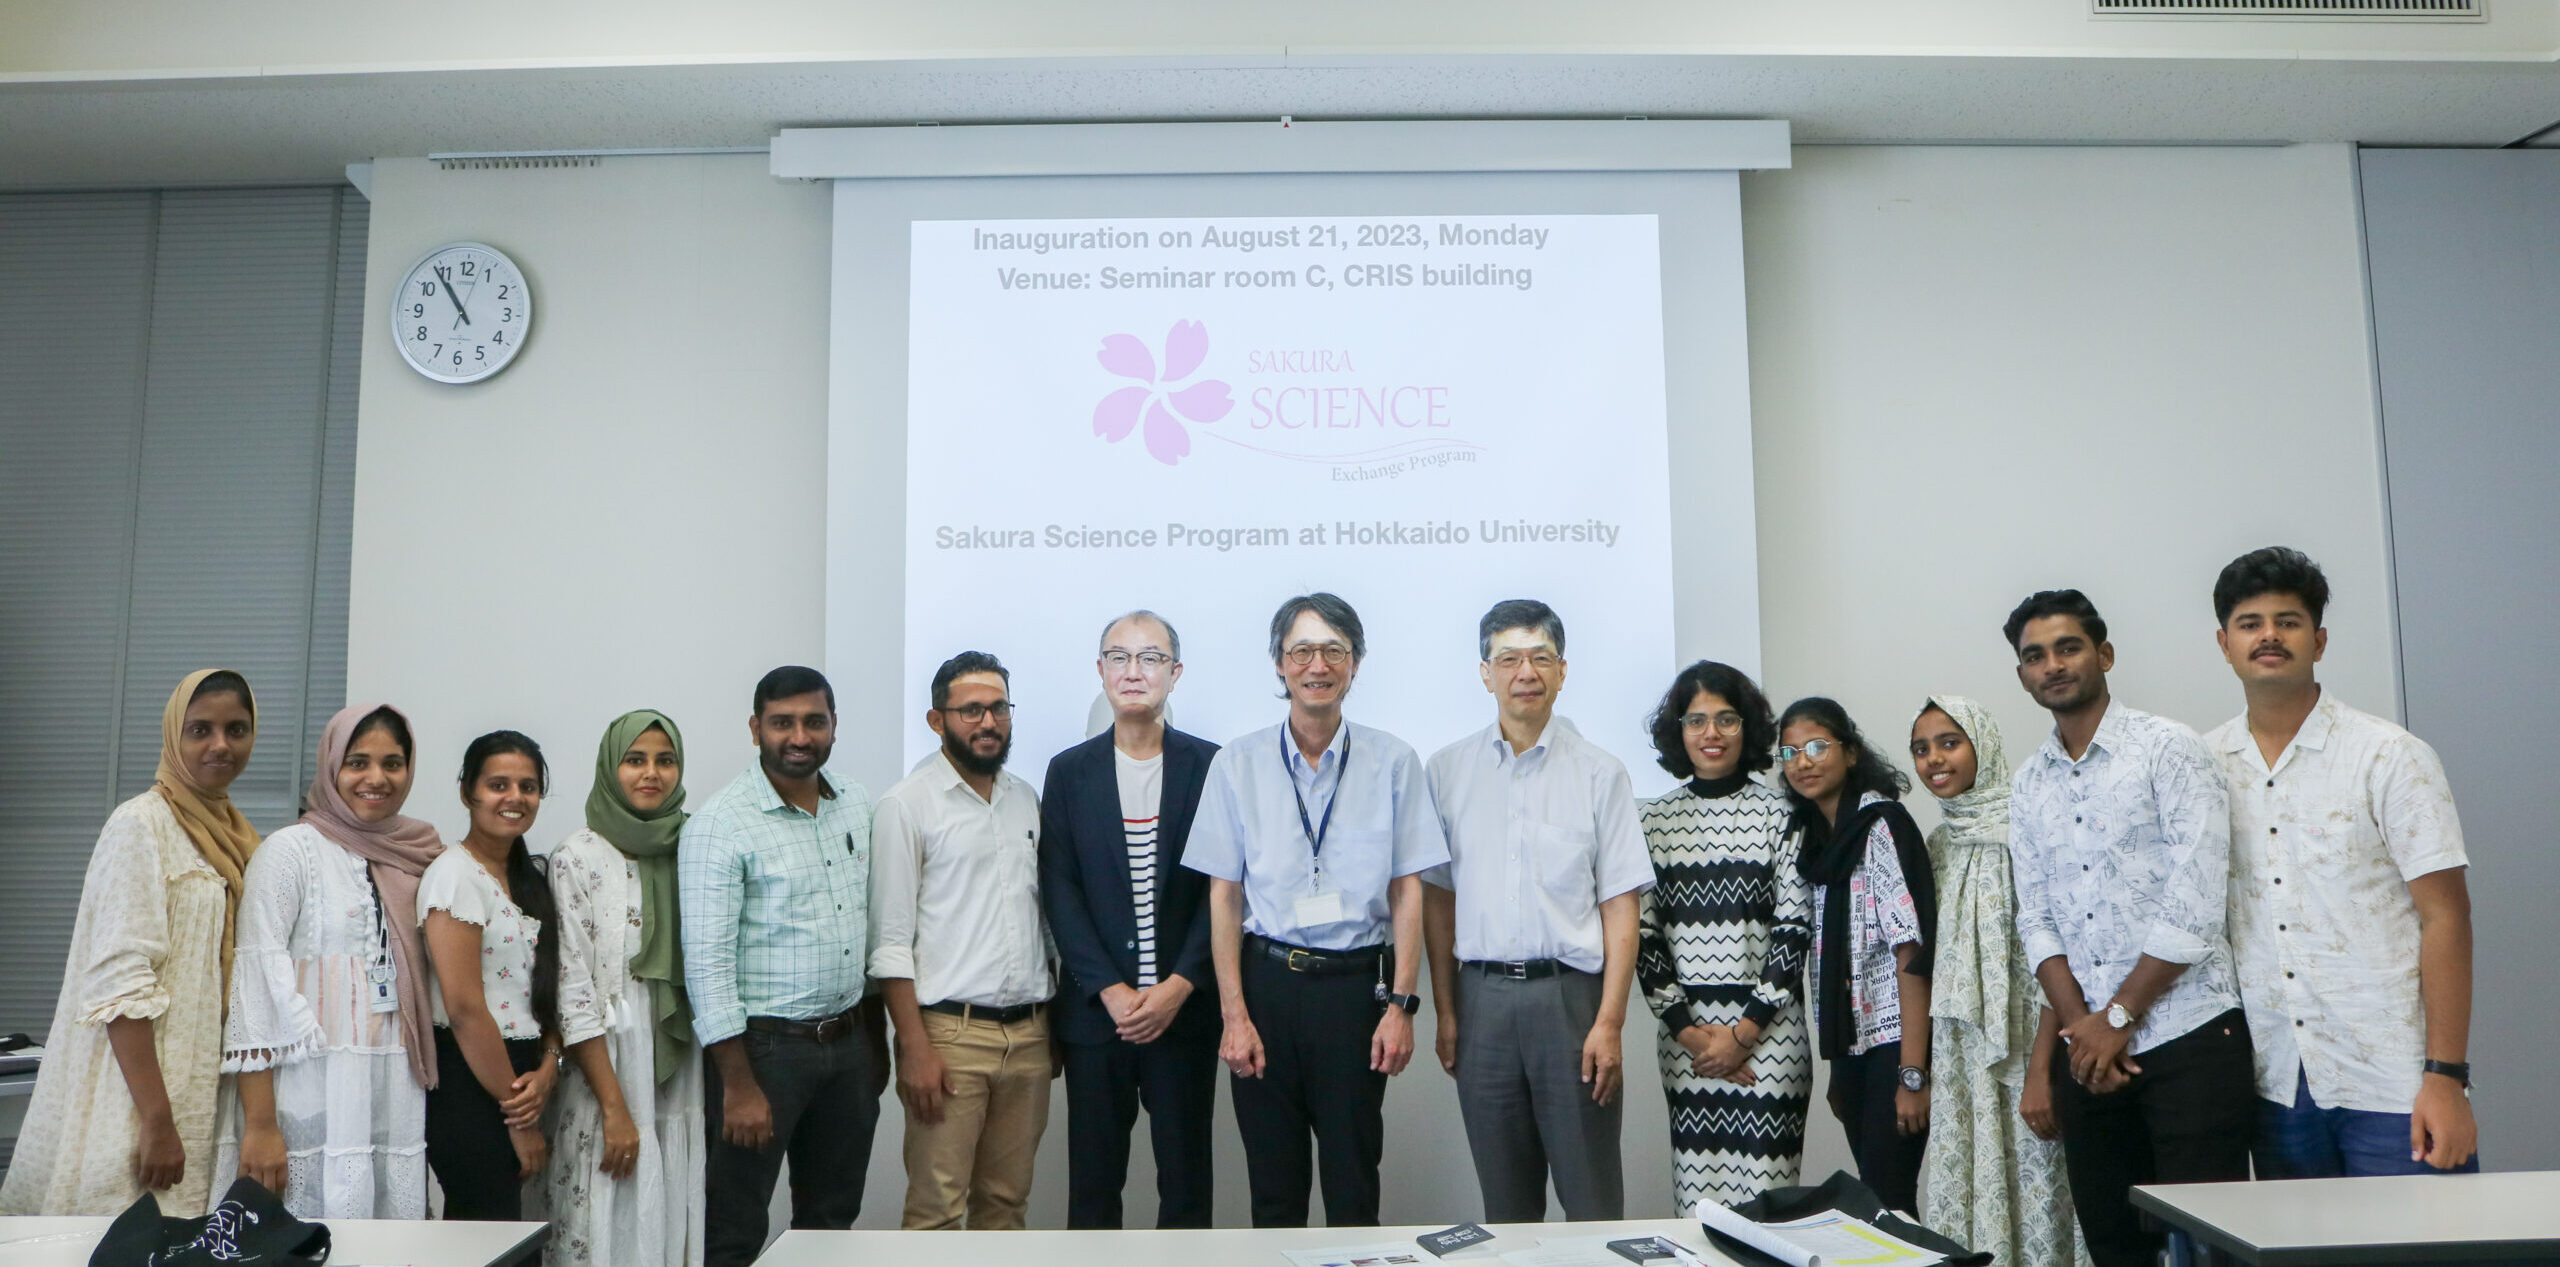 Participants and the lecturers of Sakura Science at are standing in a single line, posing for the picture. A projected image of Sakura Science Exchange Program's logo can be seen on the background.